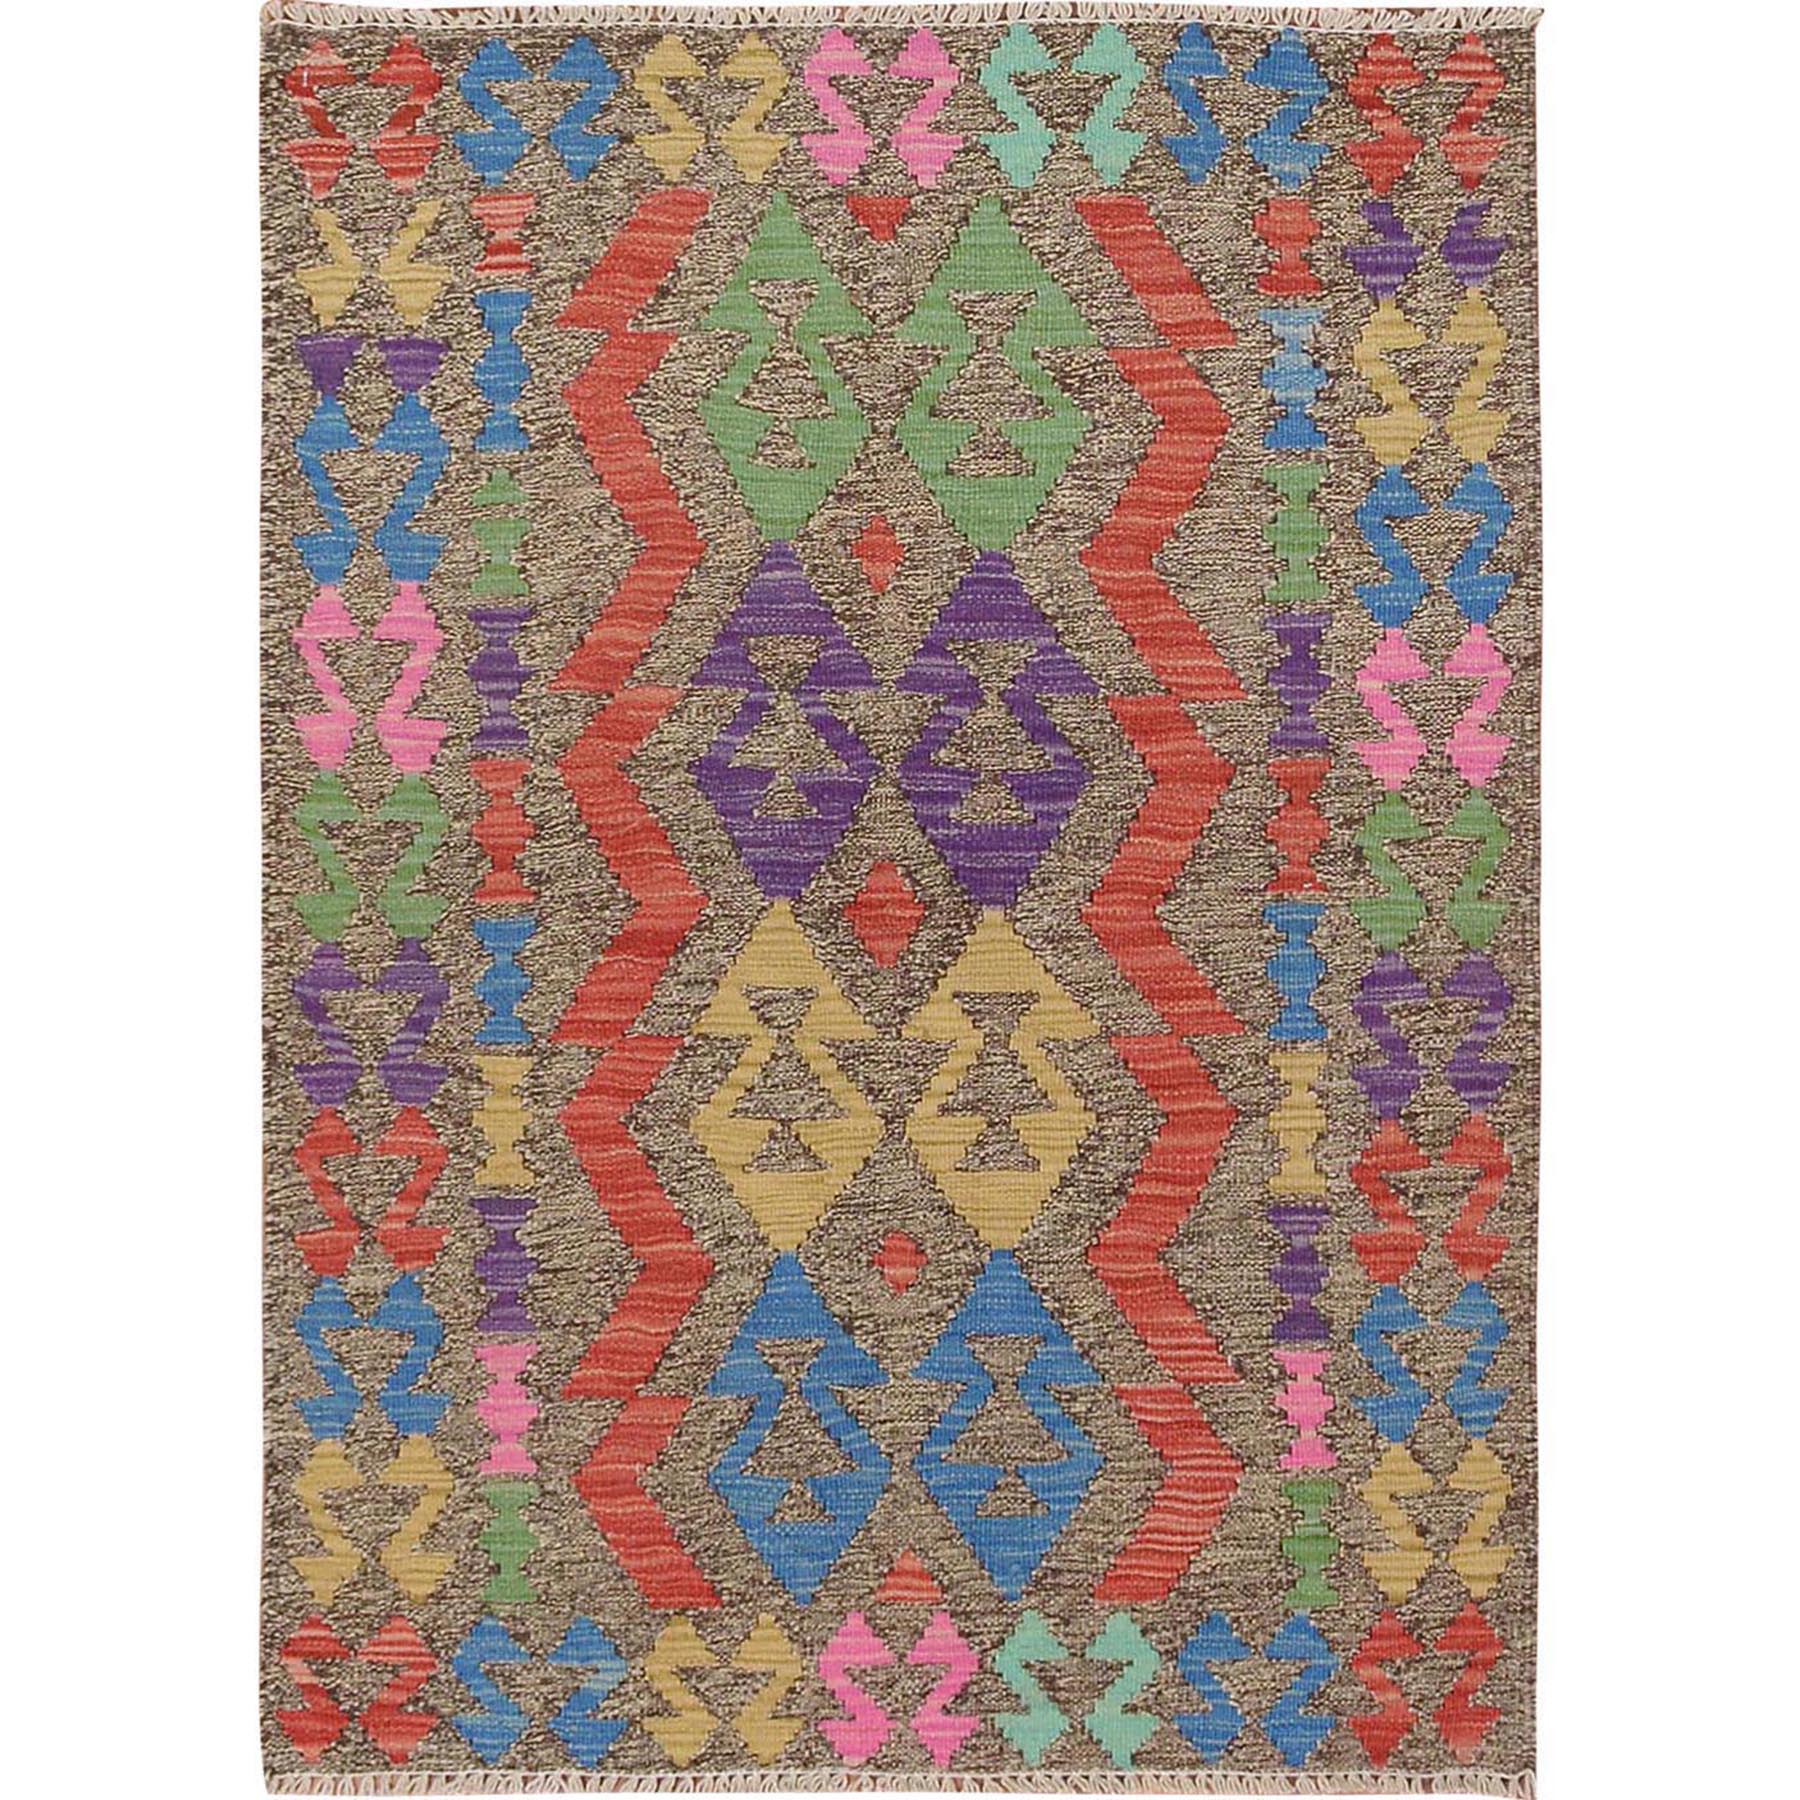 Traditional Wool Hand-Woven Area Rug 2'8